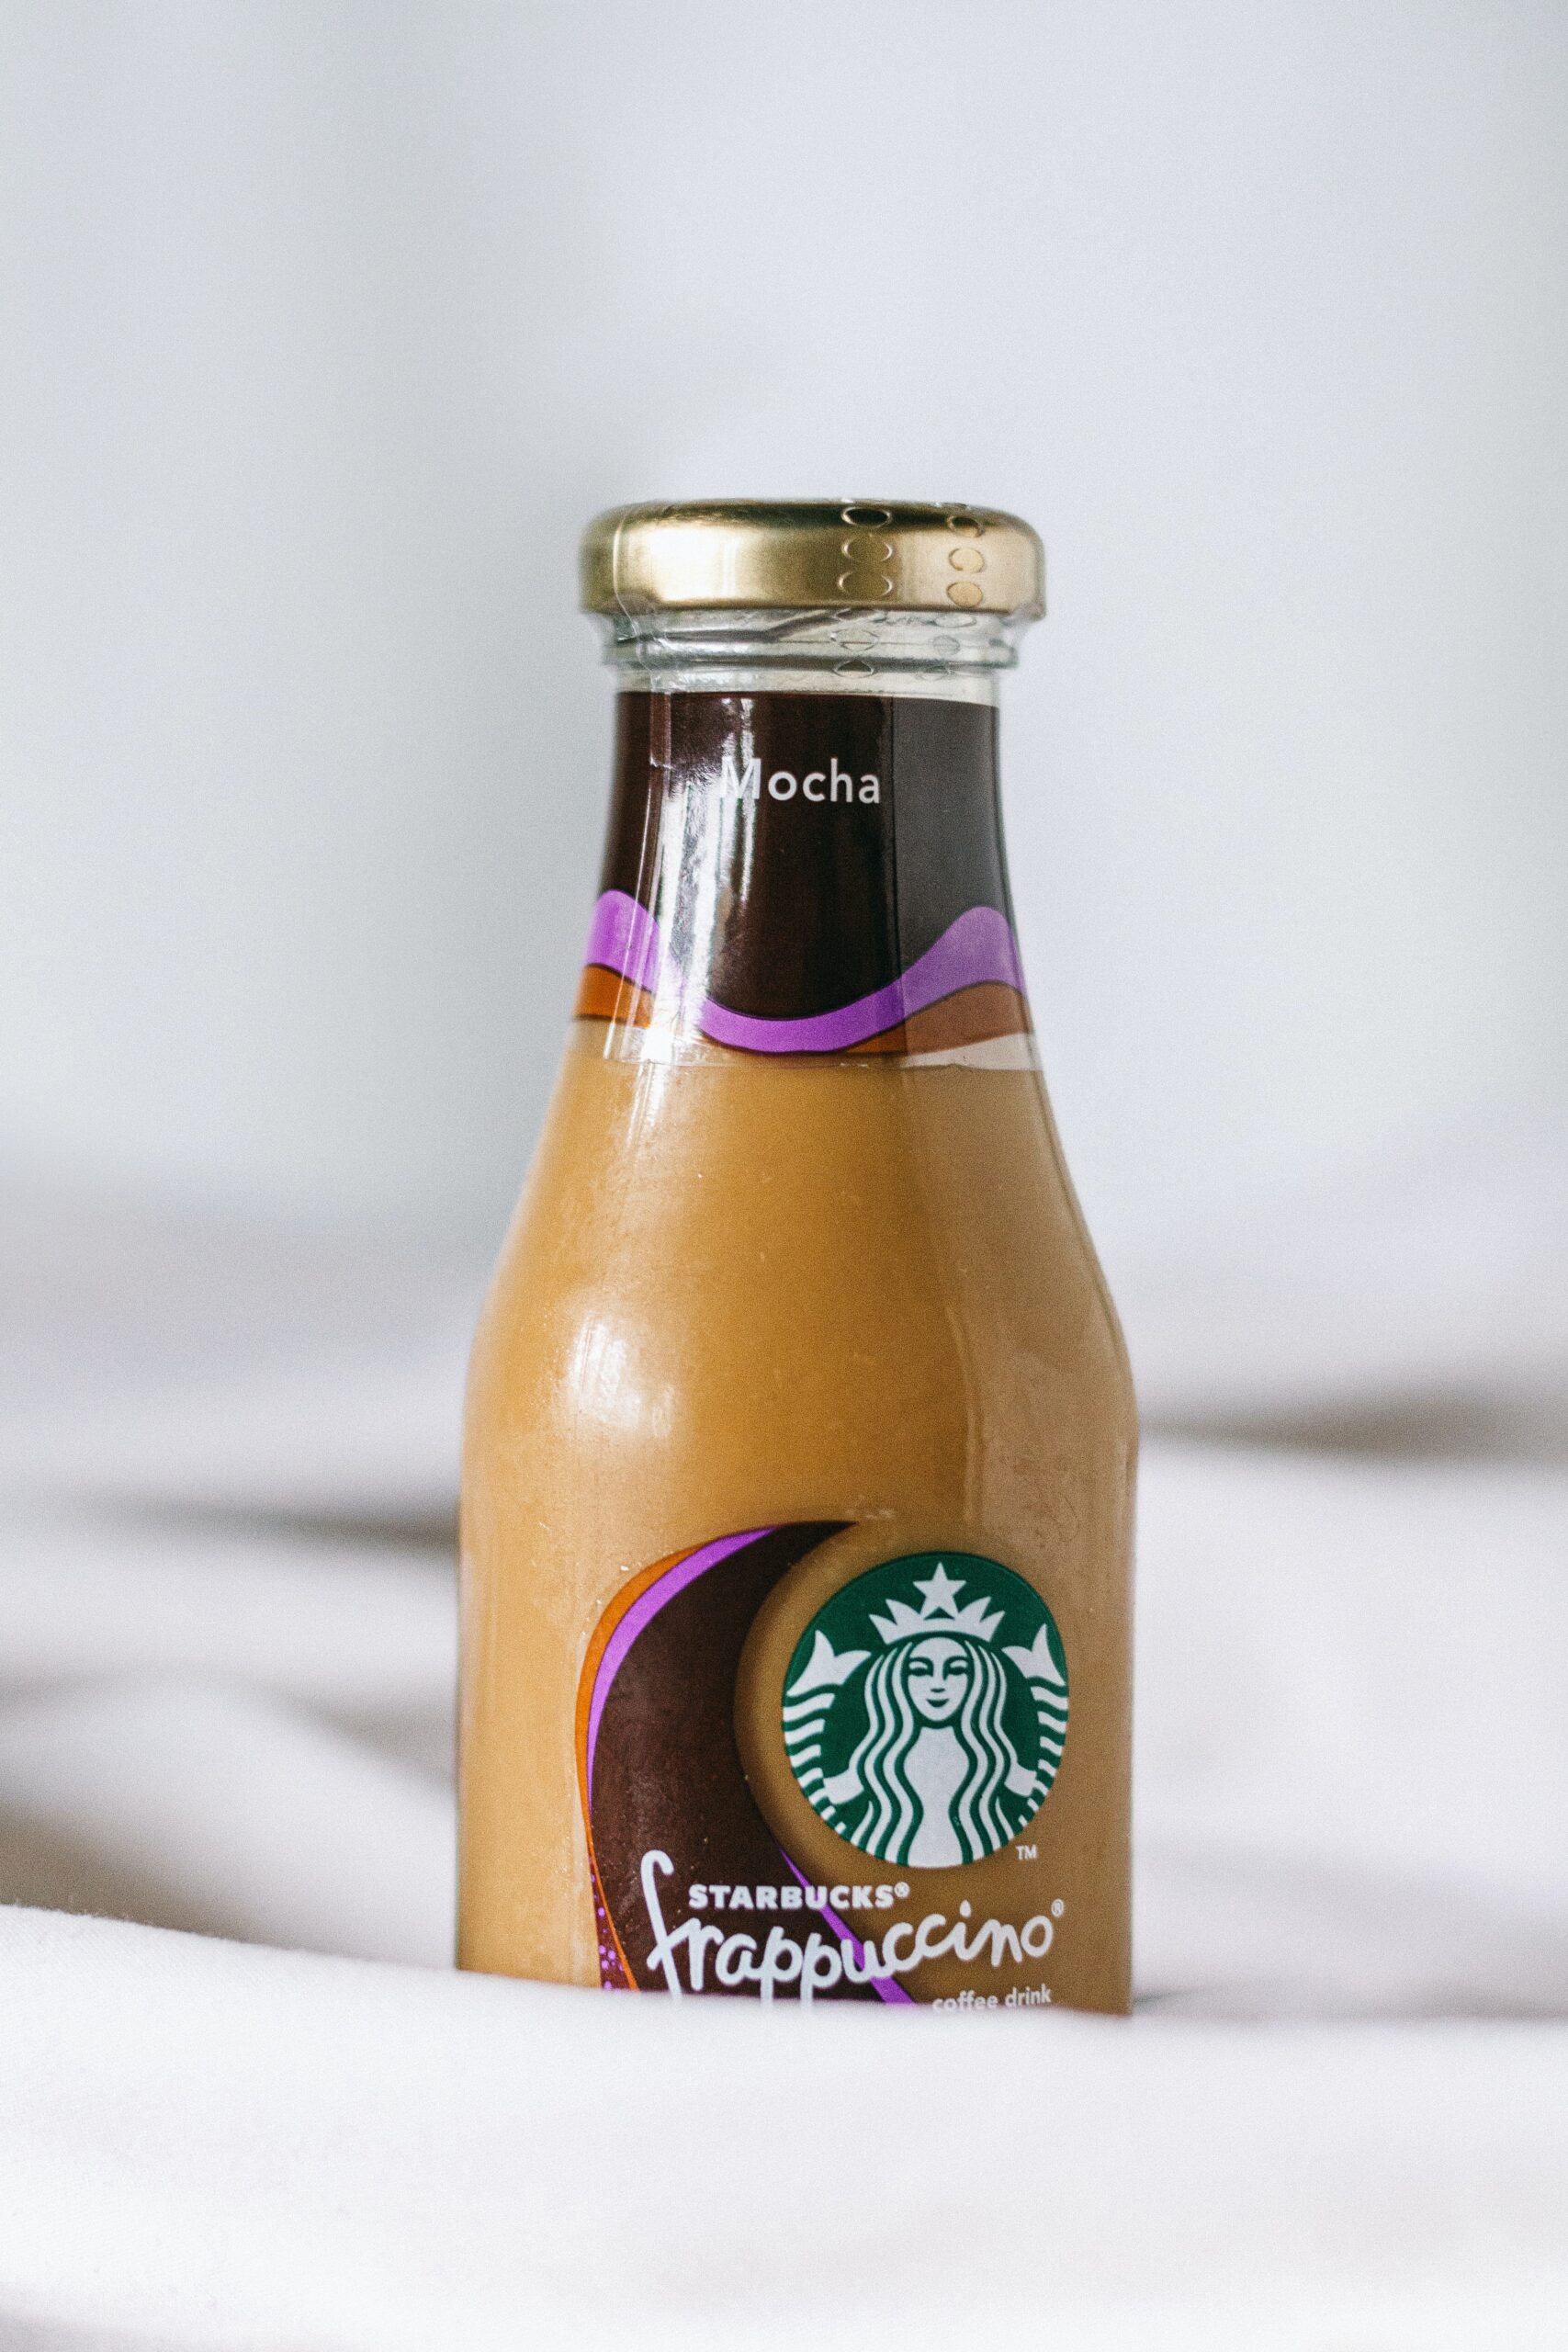 The pros and cons of drinking Starbucks Frappuccinos: Pros: